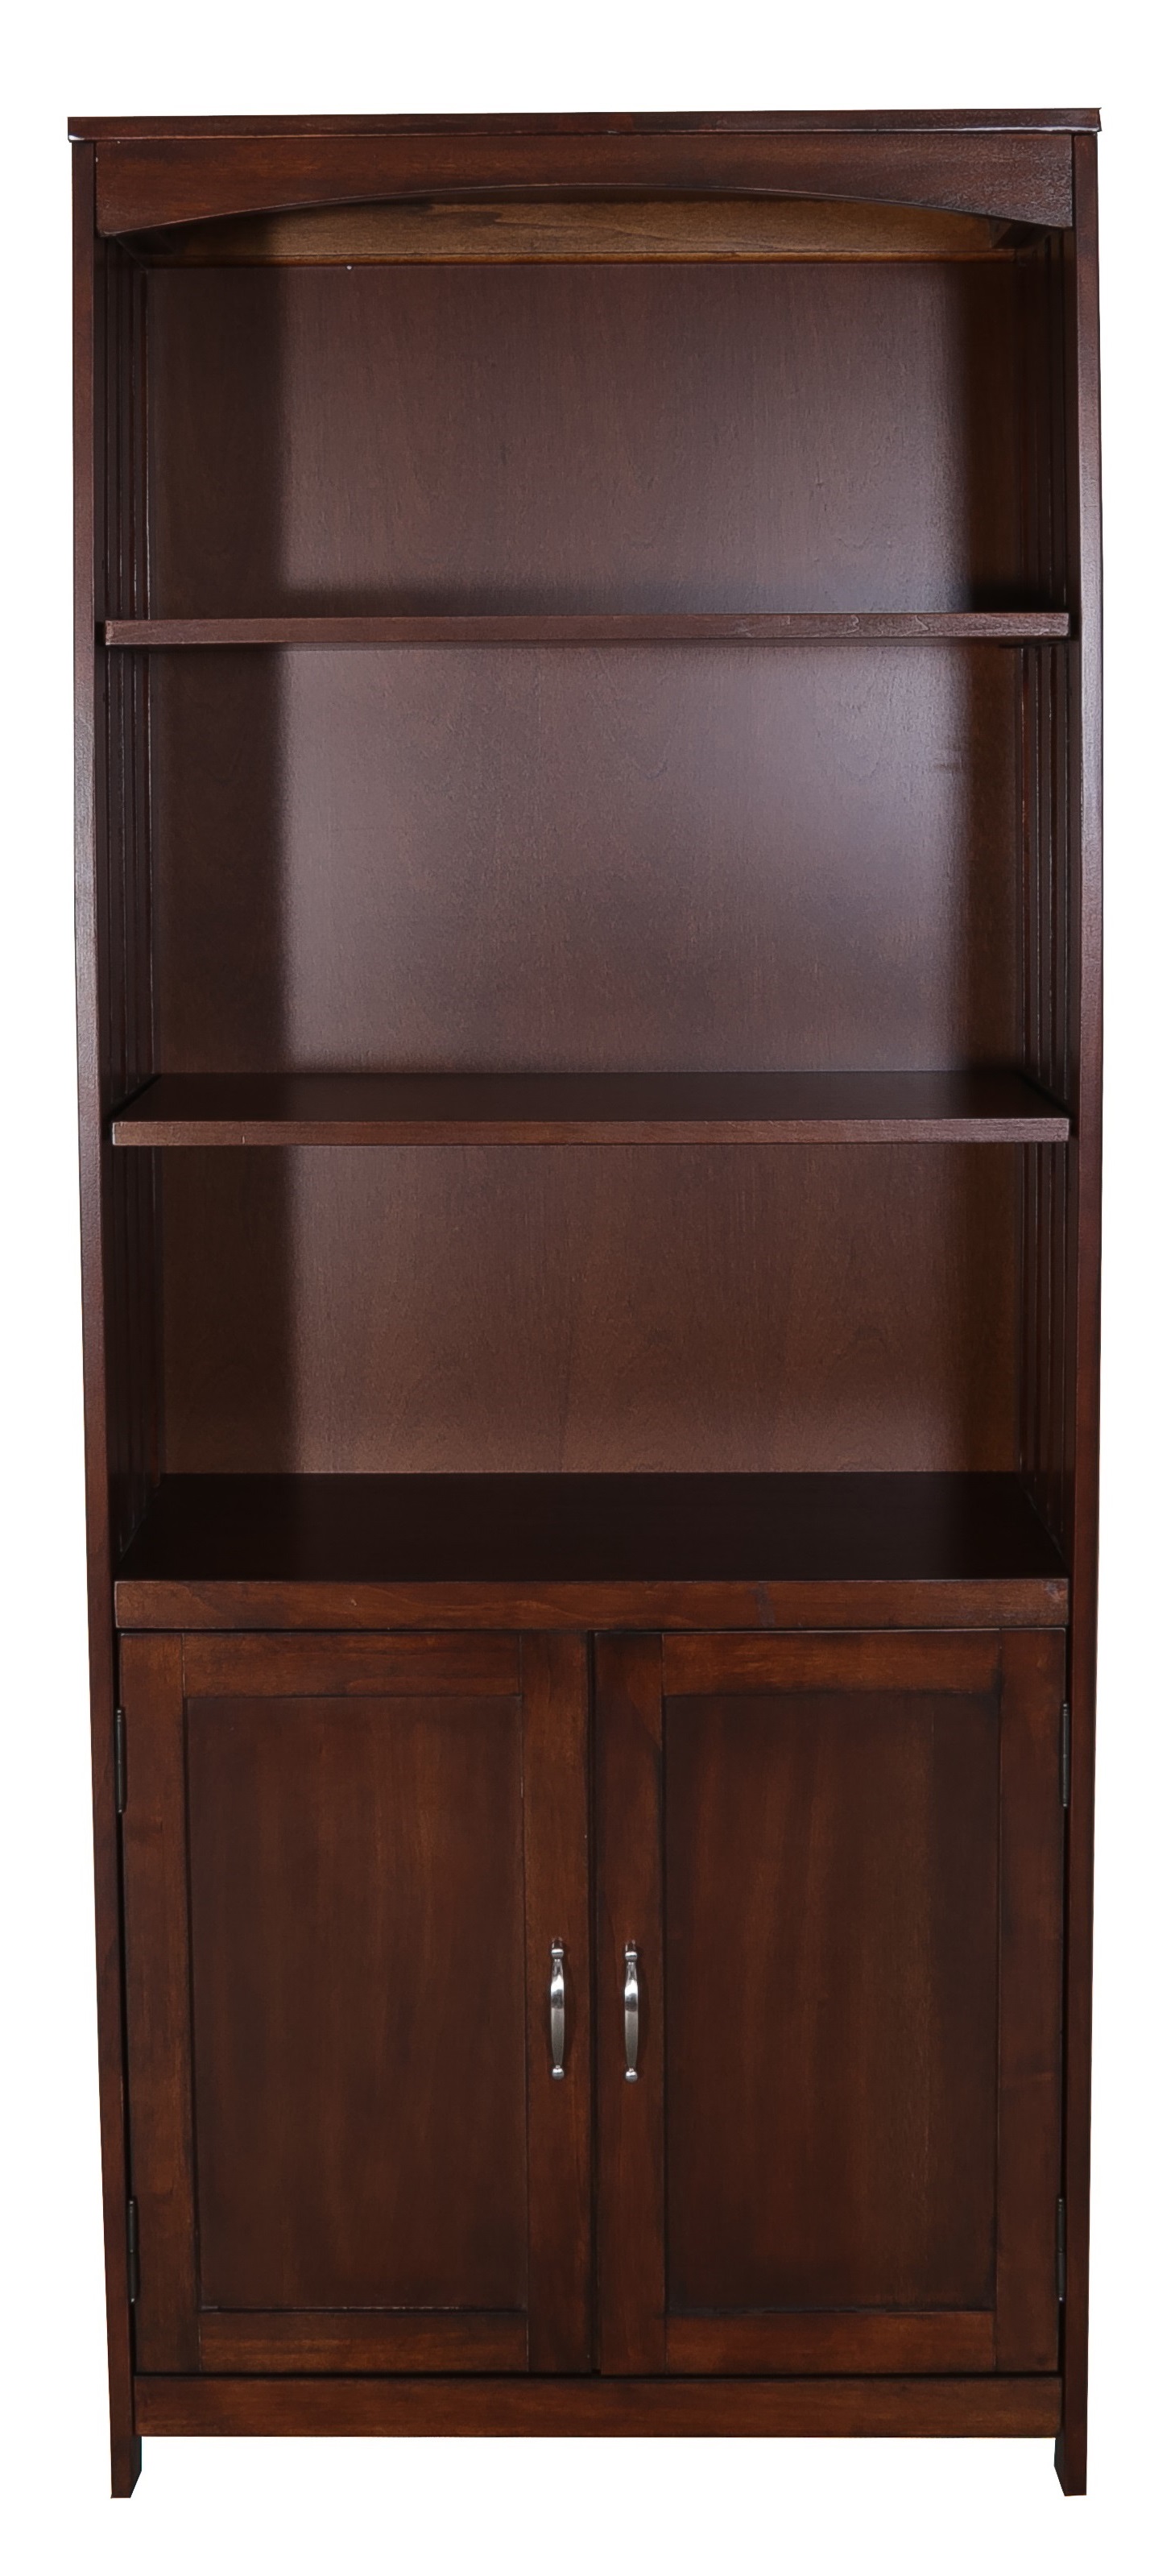 Brookmont Home Office Door Bookcase Pic